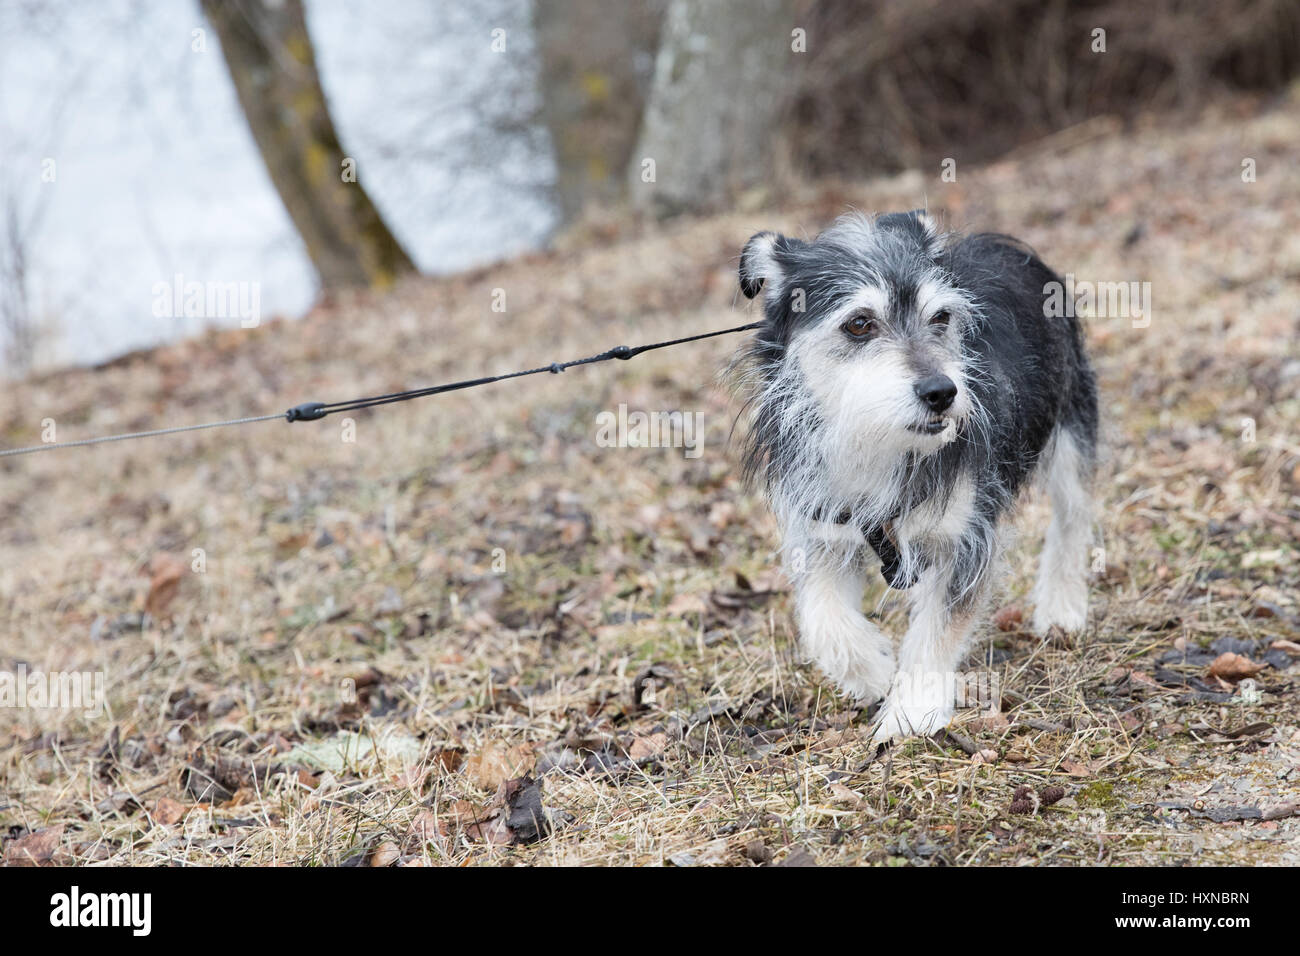 Little fluffy mutt pet dog out for walkies. Stock Photo